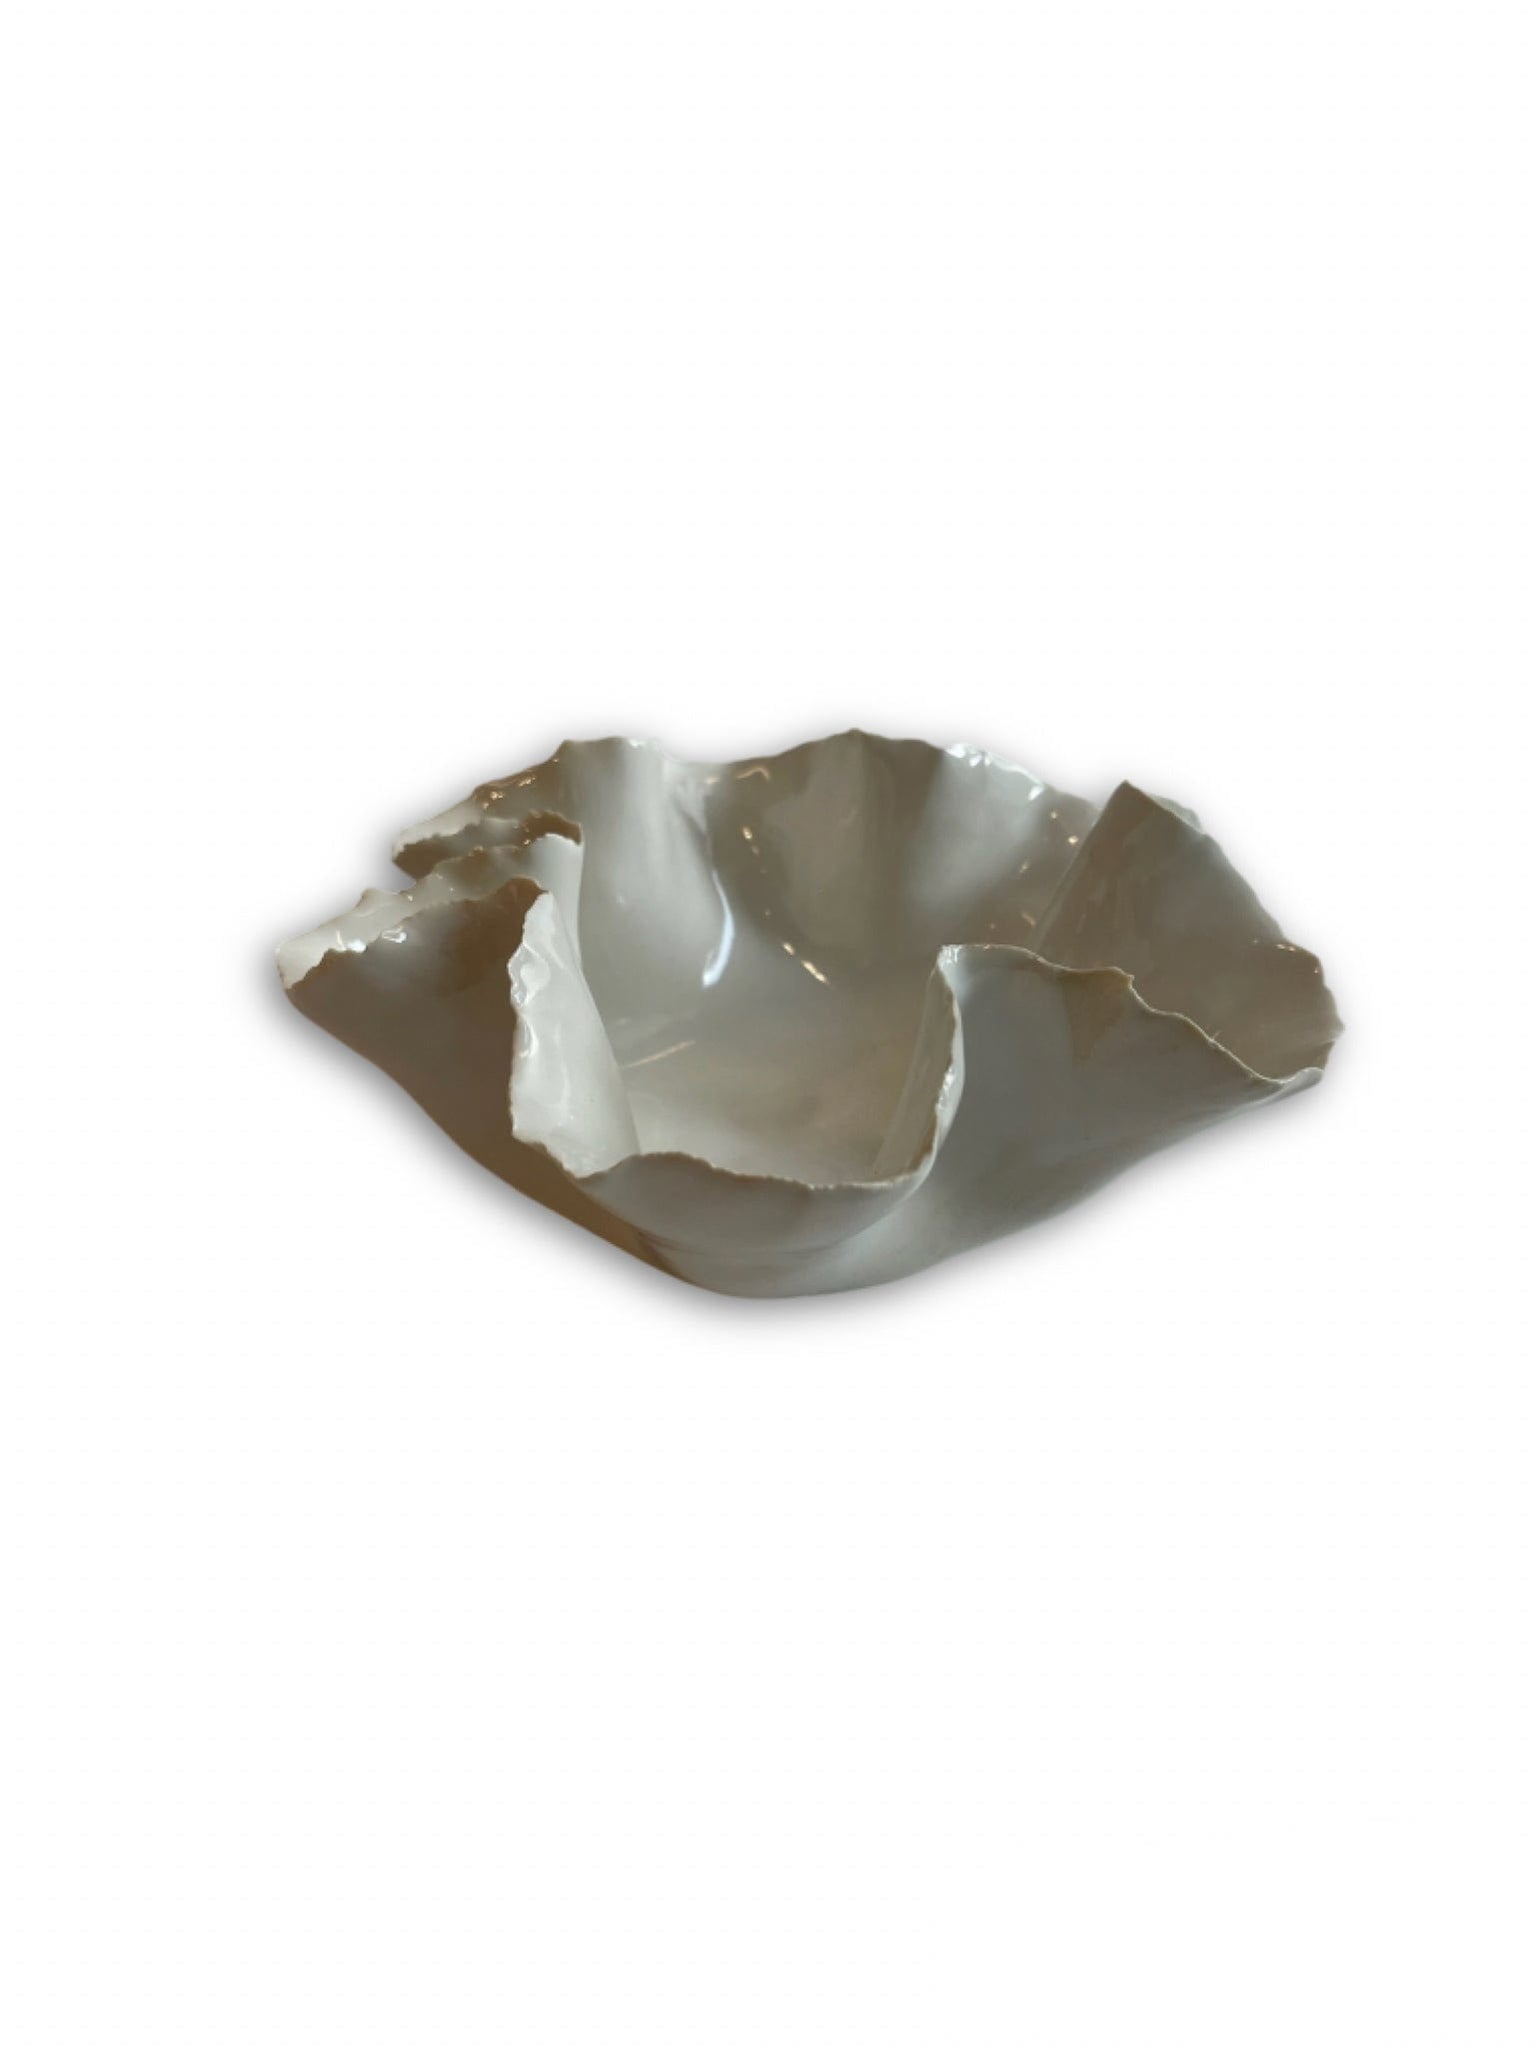 Nathalee Paolinelli Nathalee Paolinelli - Torn Ruffle Bowl in White Gloss La Bomba Floristry Vancouver Canada